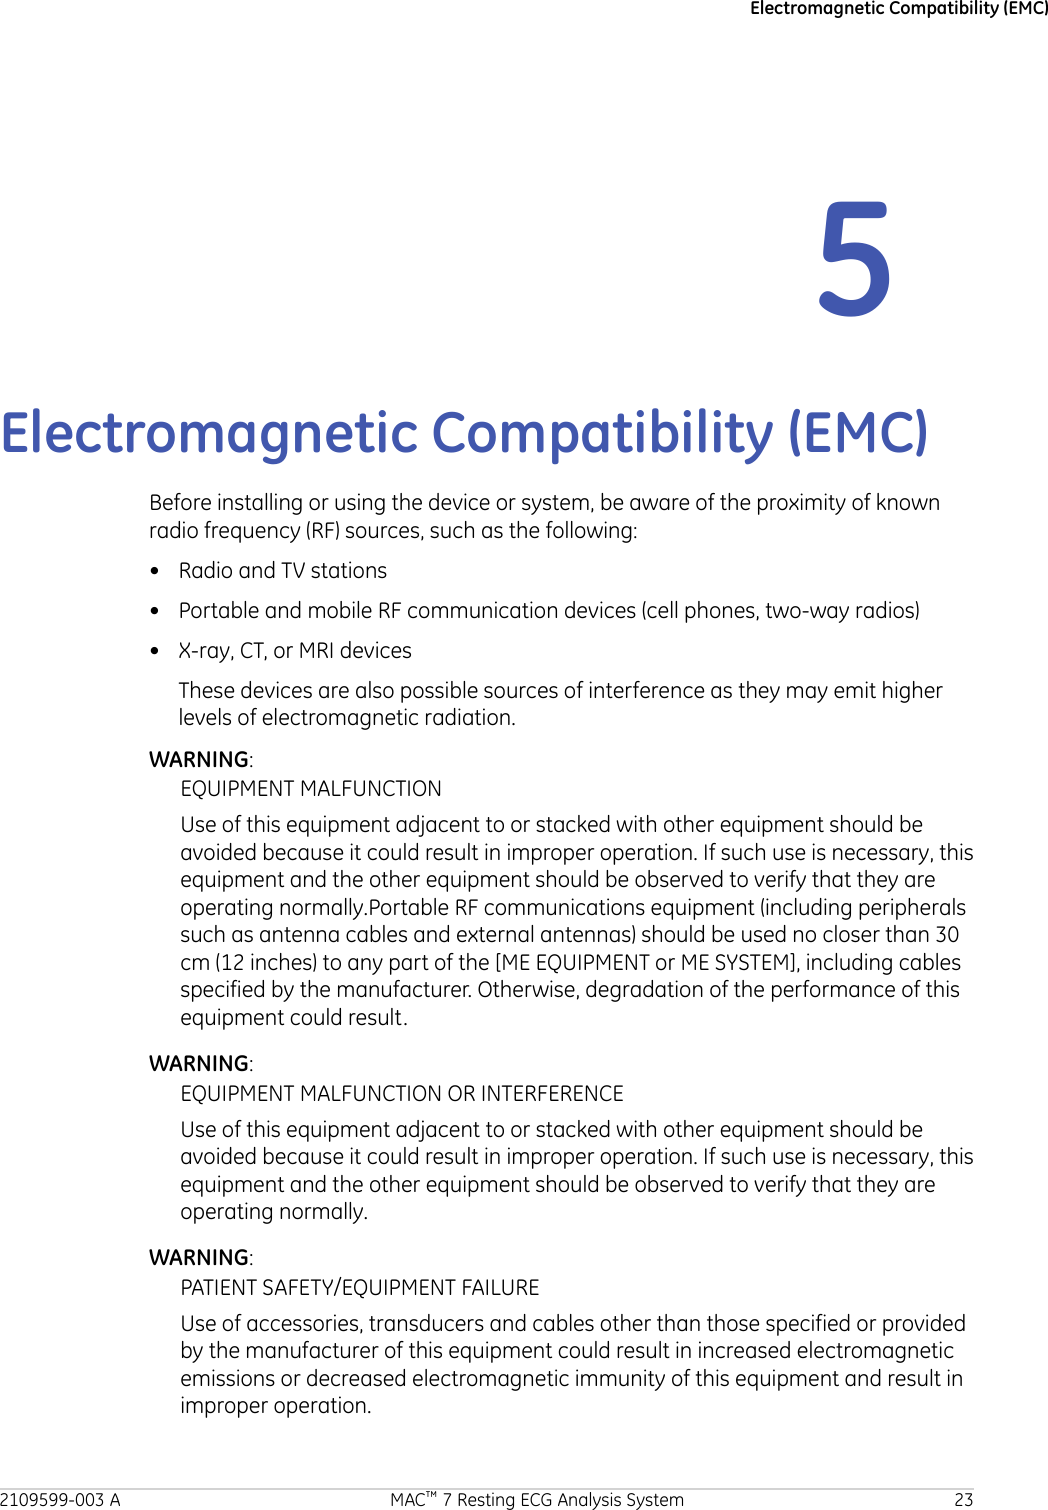 Electromagnetic Compatibility (EMC)5Electromagnetic Compatibility (EMC)Before installing or using the device or system, be aware of the proximity of knownradio frequency (RF) sources, such as the following:• Radio and TV stations• Portable and mobile RF communication devices (cell phones, two-way radios)• X-ray, CT, or MRI devicesThese devices are also possible sources of interference as they may emit higherlevels of electromagnetic radiation.WARNING:EQUIPMENT MALFUNCTIONUse of this equipment adjacent to or stacked with other equipment should beavoided because it could result in improper operation. If such use is necessary, thisequipment and the other equipment should be observed to verify that they areoperating normally.Portable RF communications equipment (including peripheralssuch as antenna cables and external antennas) should be used no closer than 30cm (12 inches) to any part of the [ME EQUIPMENT or ME SYSTEM], including cablesspecified by the manufacturer. Otherwise, degradation of the performance of thisequipment could result.WARNING:EQUIPMENT MALFUNCTION OR INTERFERENCEUse of this equipment adjacent to or stacked with other equipment should beavoided because it could result in improper operation. If such use is necessary, thisequipment and the other equipment should be observed to verify that they areoperating normally.WARNING:PATIENT SAFETY/EQUIPMENT FAILUREUse of accessories, transducers and cables other than those specified or providedby the manufacturer of this equipment could result in increased electromagneticemissions or decreased electromagnetic immunity of this equipment and result inimproper operation.2109599-003 A MAC™ 7 Resting ECG Analysis System 23